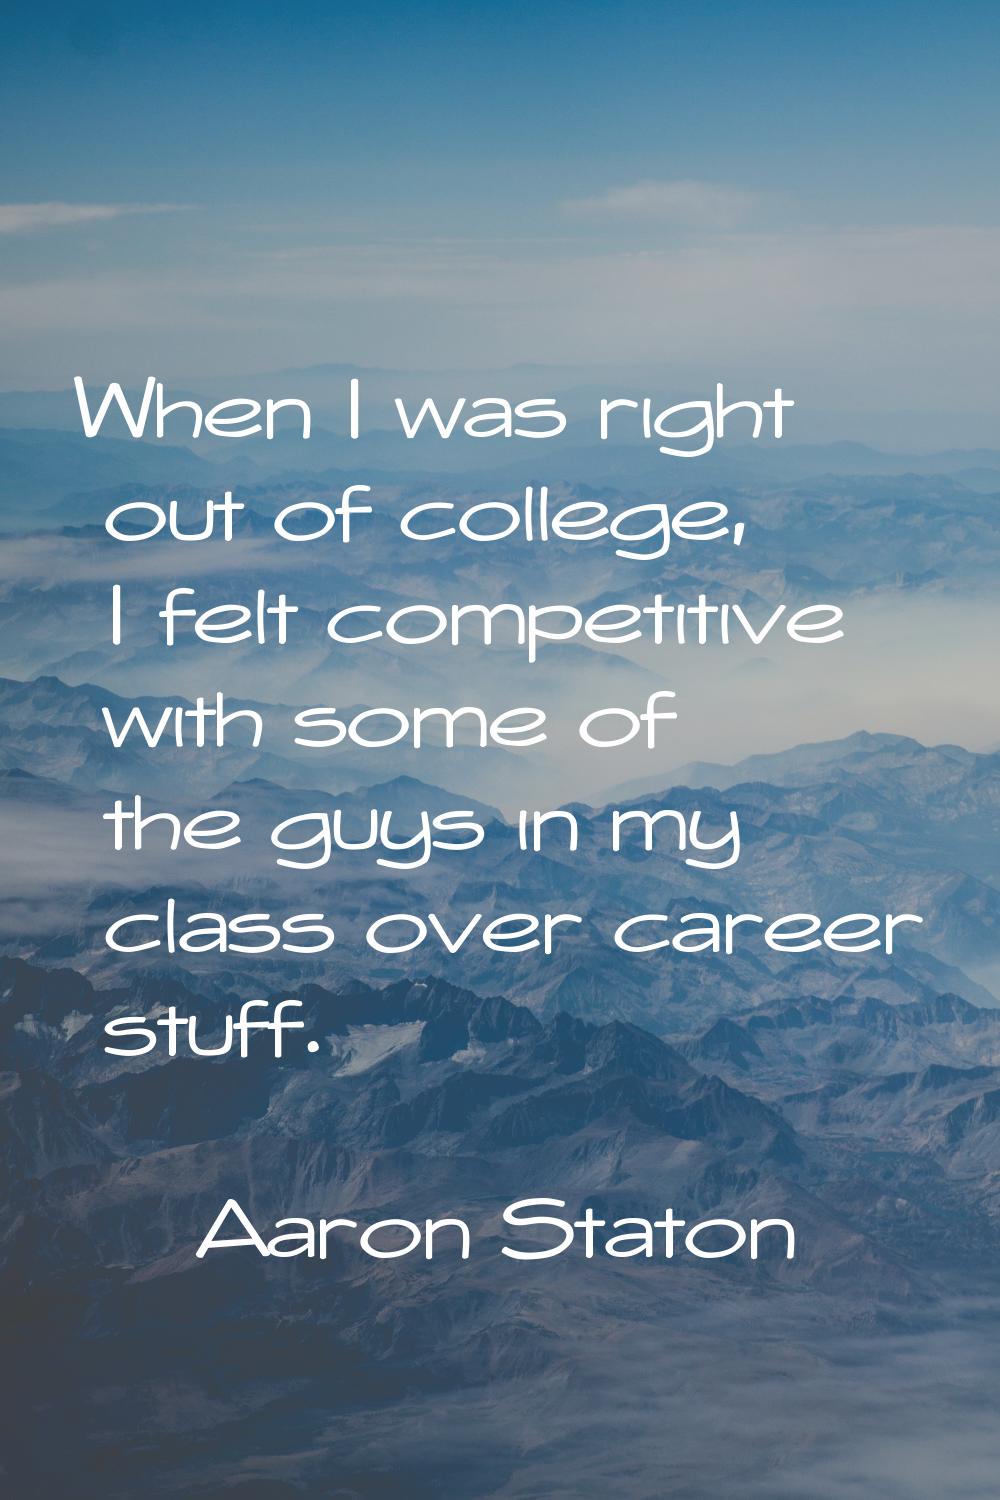 When I was right out of college, I felt competitive with some of the guys in my class over career s